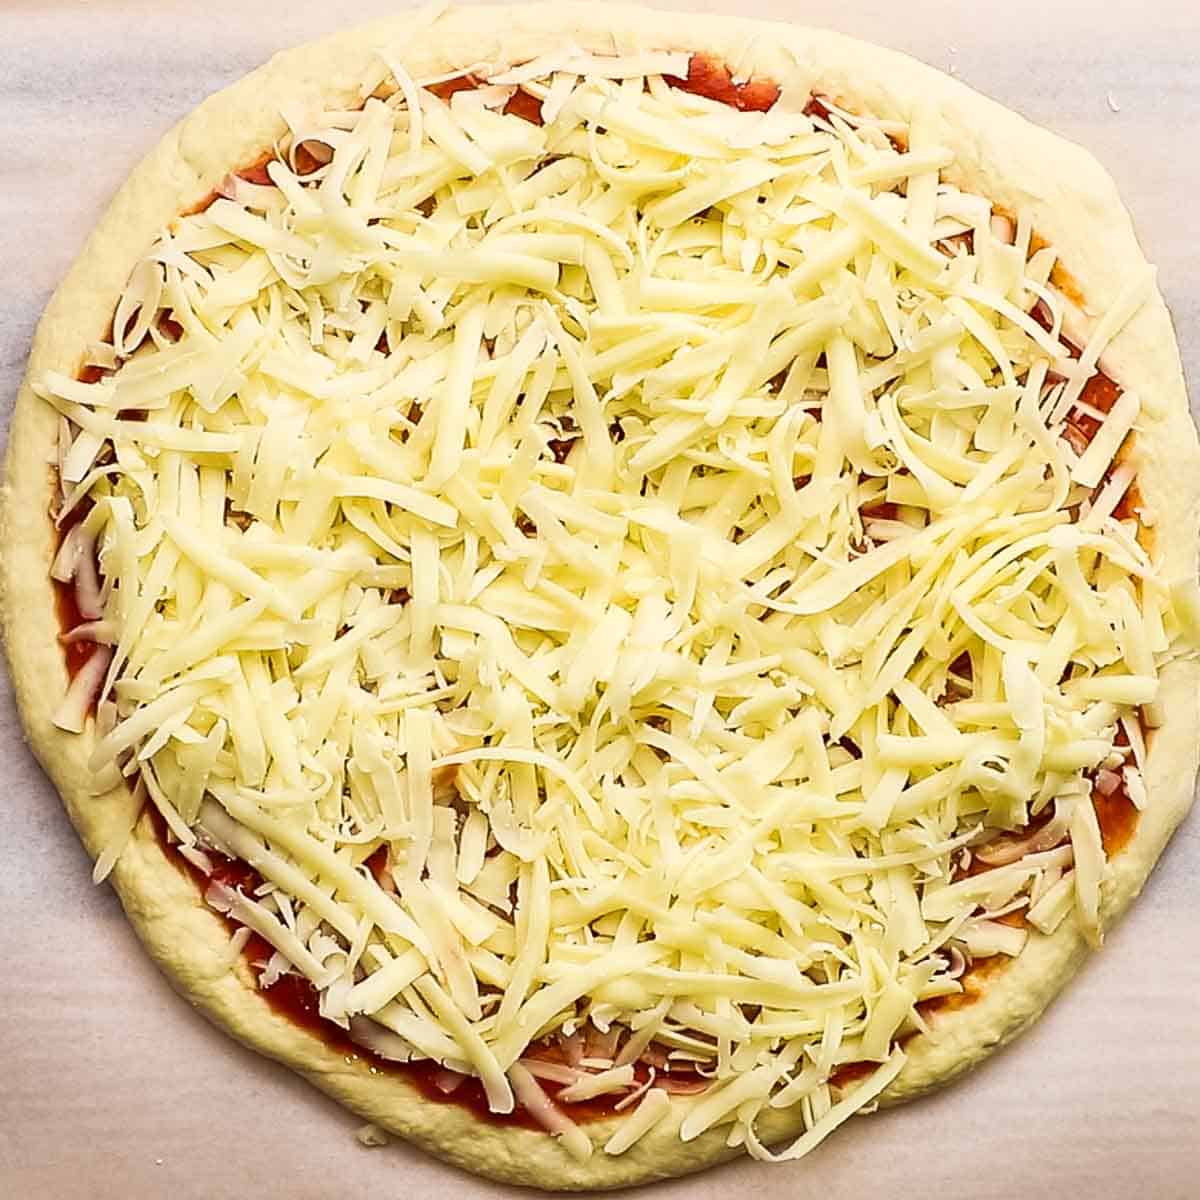 grated cheese spread on top of the pizza